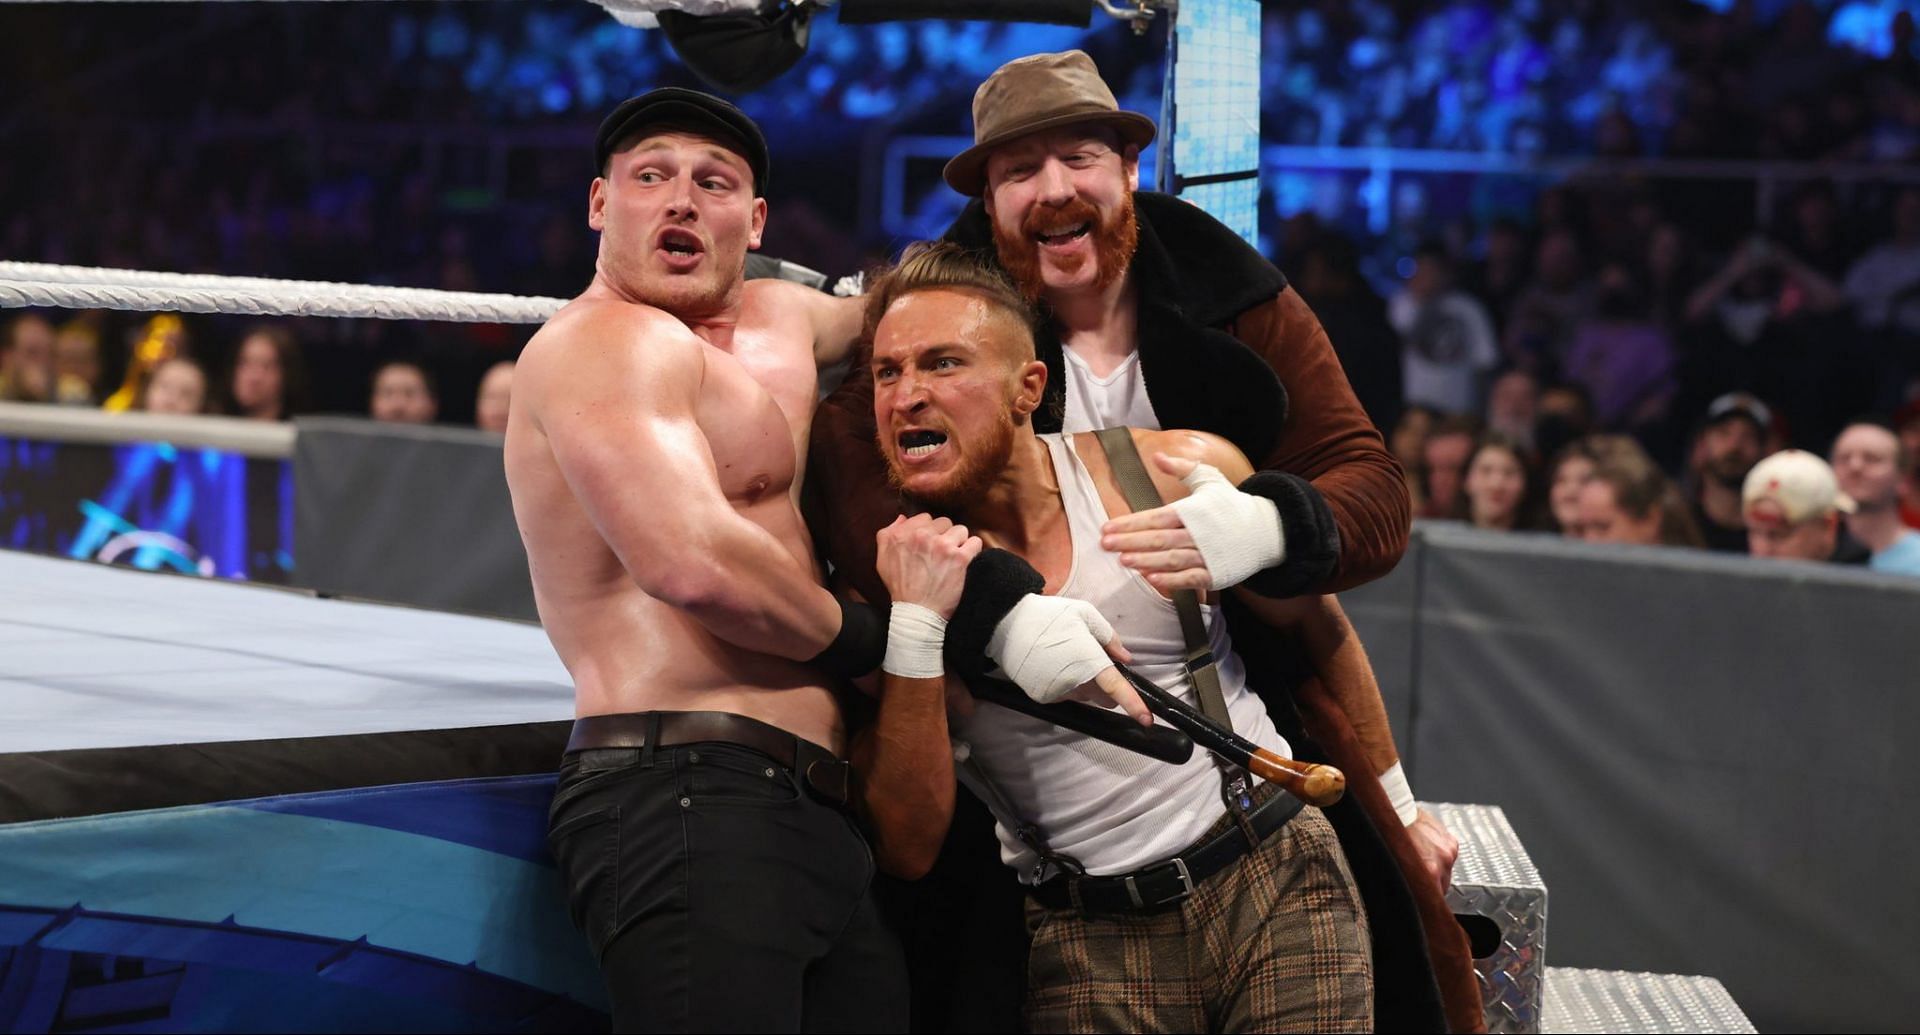 Brawling Brutes consists of Sheamus, Butch, and Ridge Holland